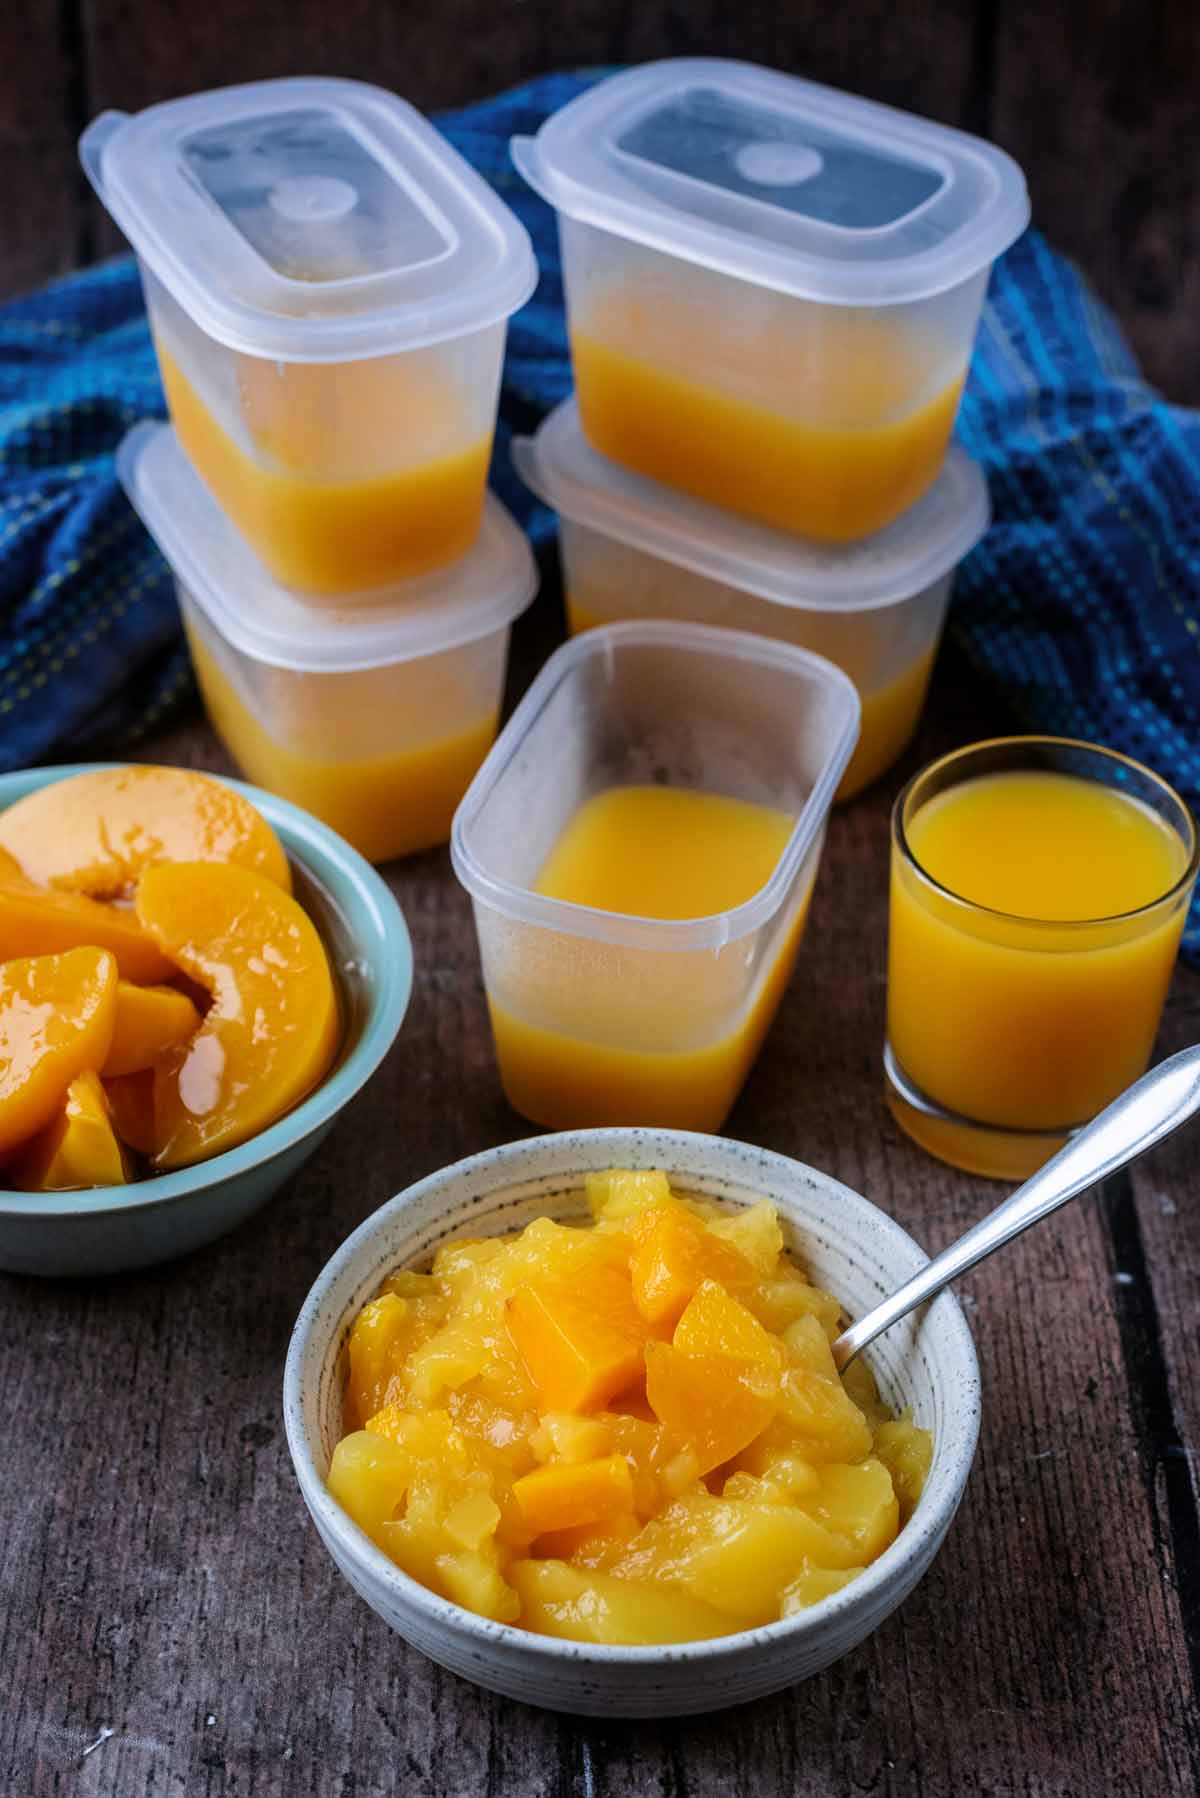 Plastic pots containing orange jelly with a bowl of jelly in front of them.